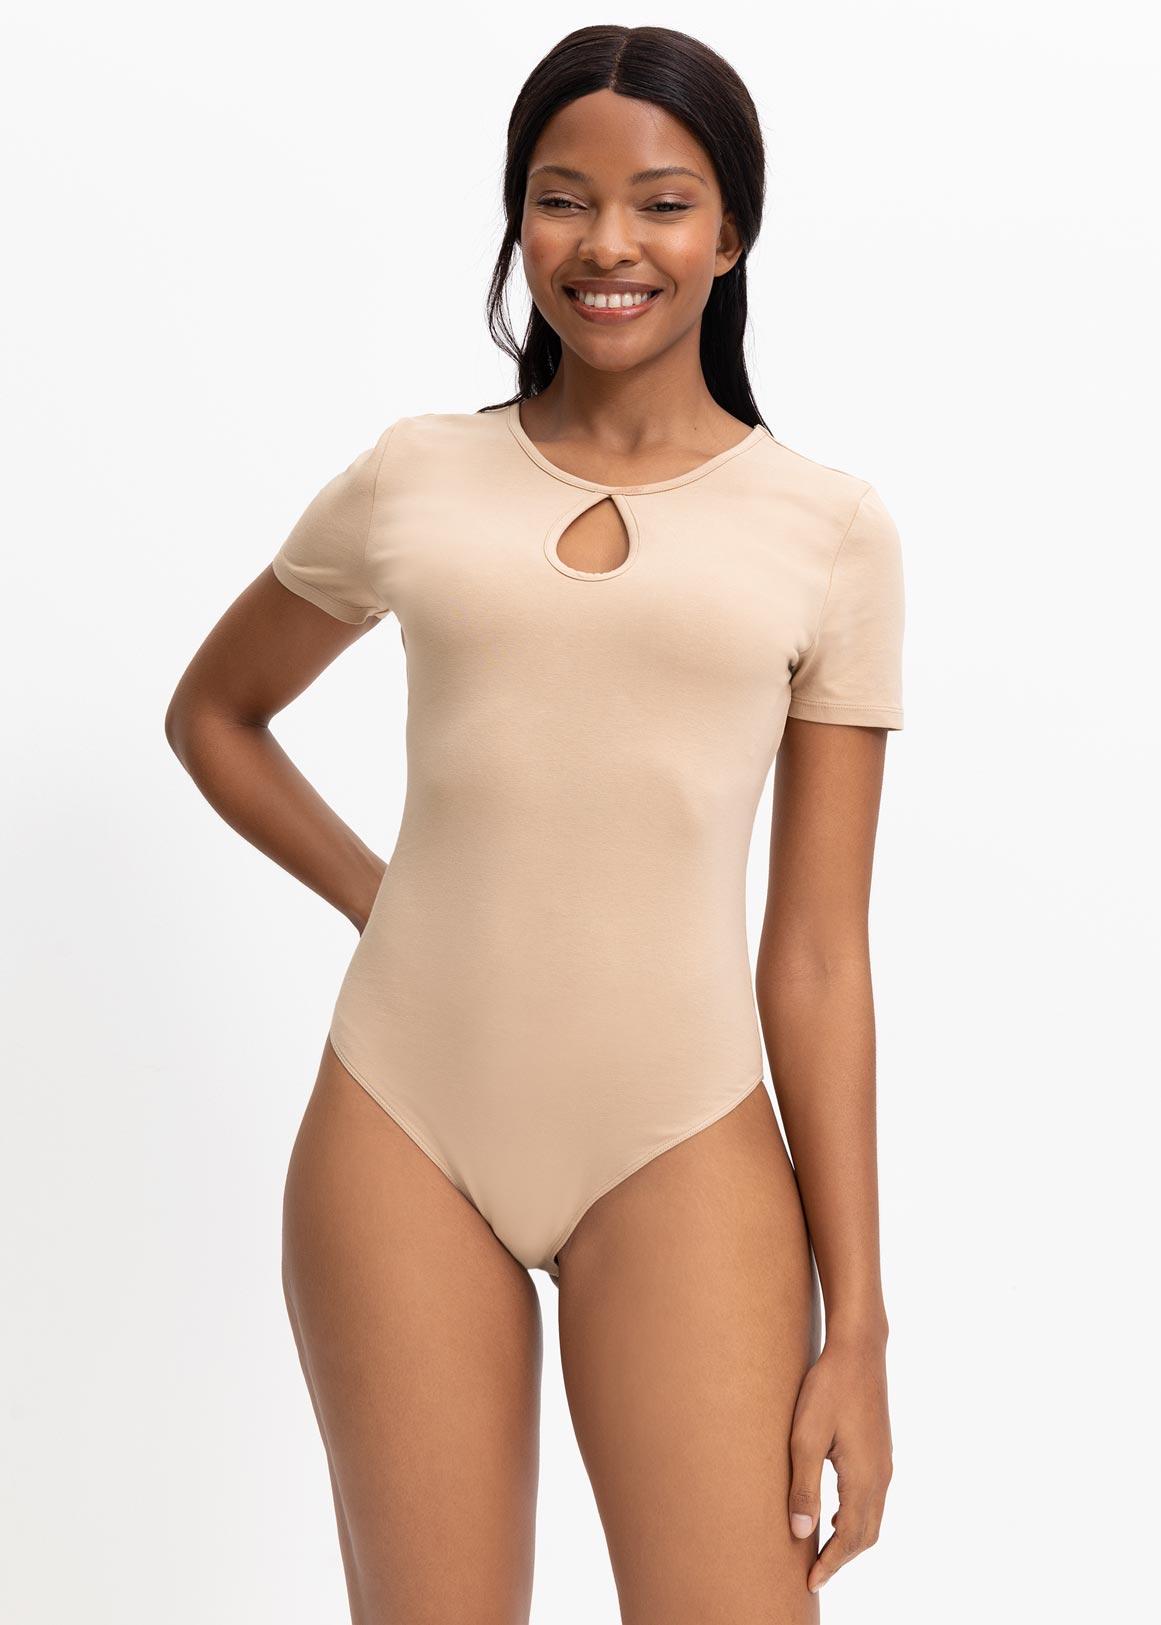 Deep V Body Suit in Stretch Cotton, Women's Tops